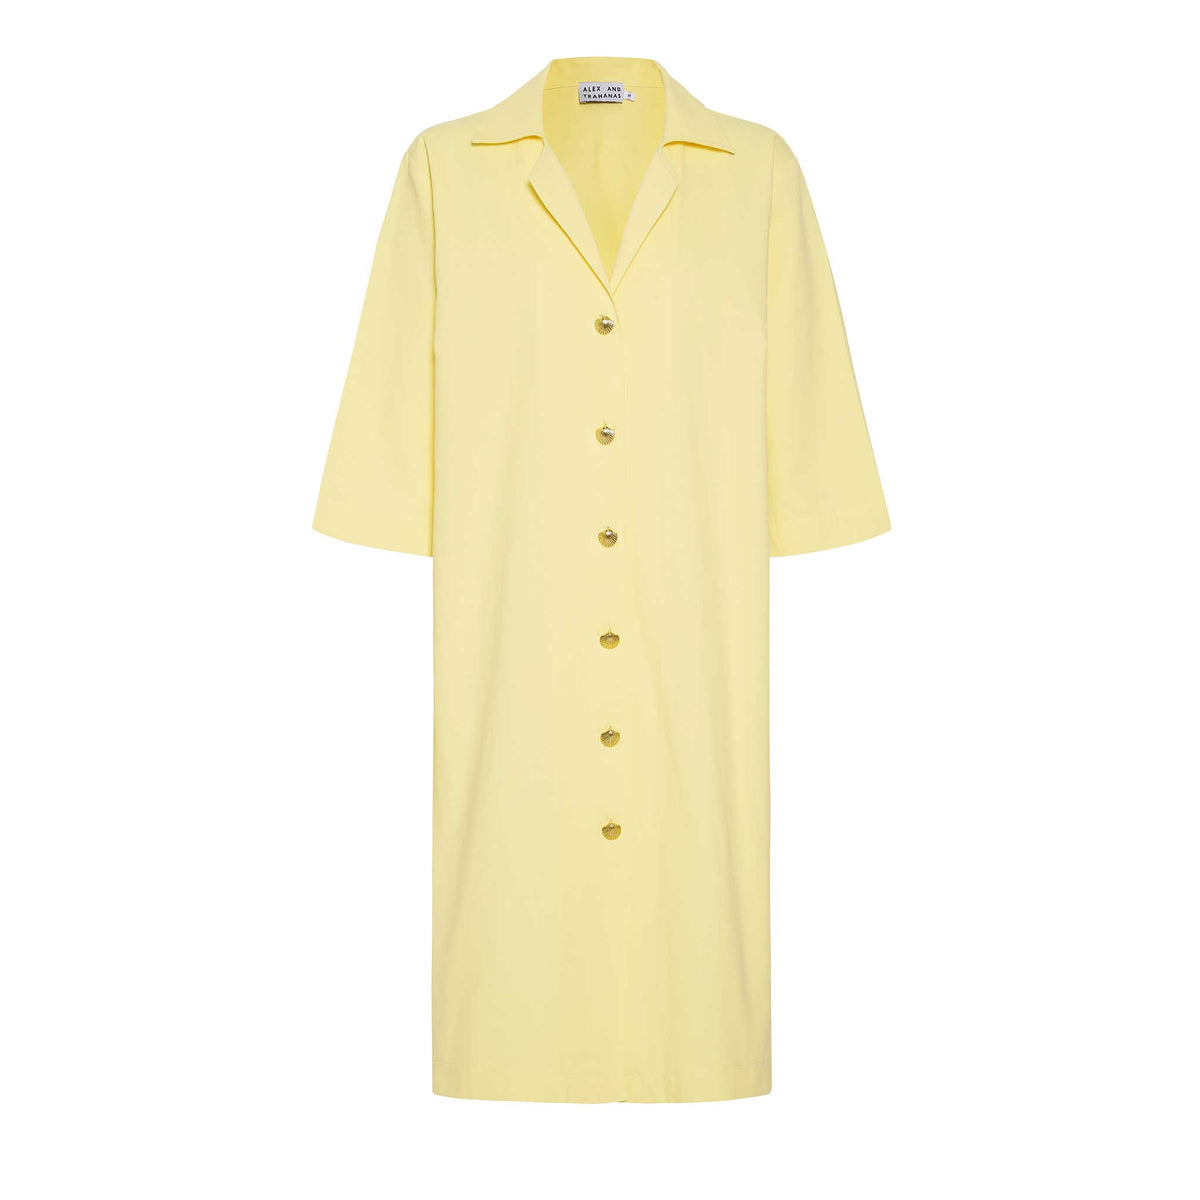 Ischia shirt dress with gold anchor buttons, limone – ALEX AND TRAHANAS